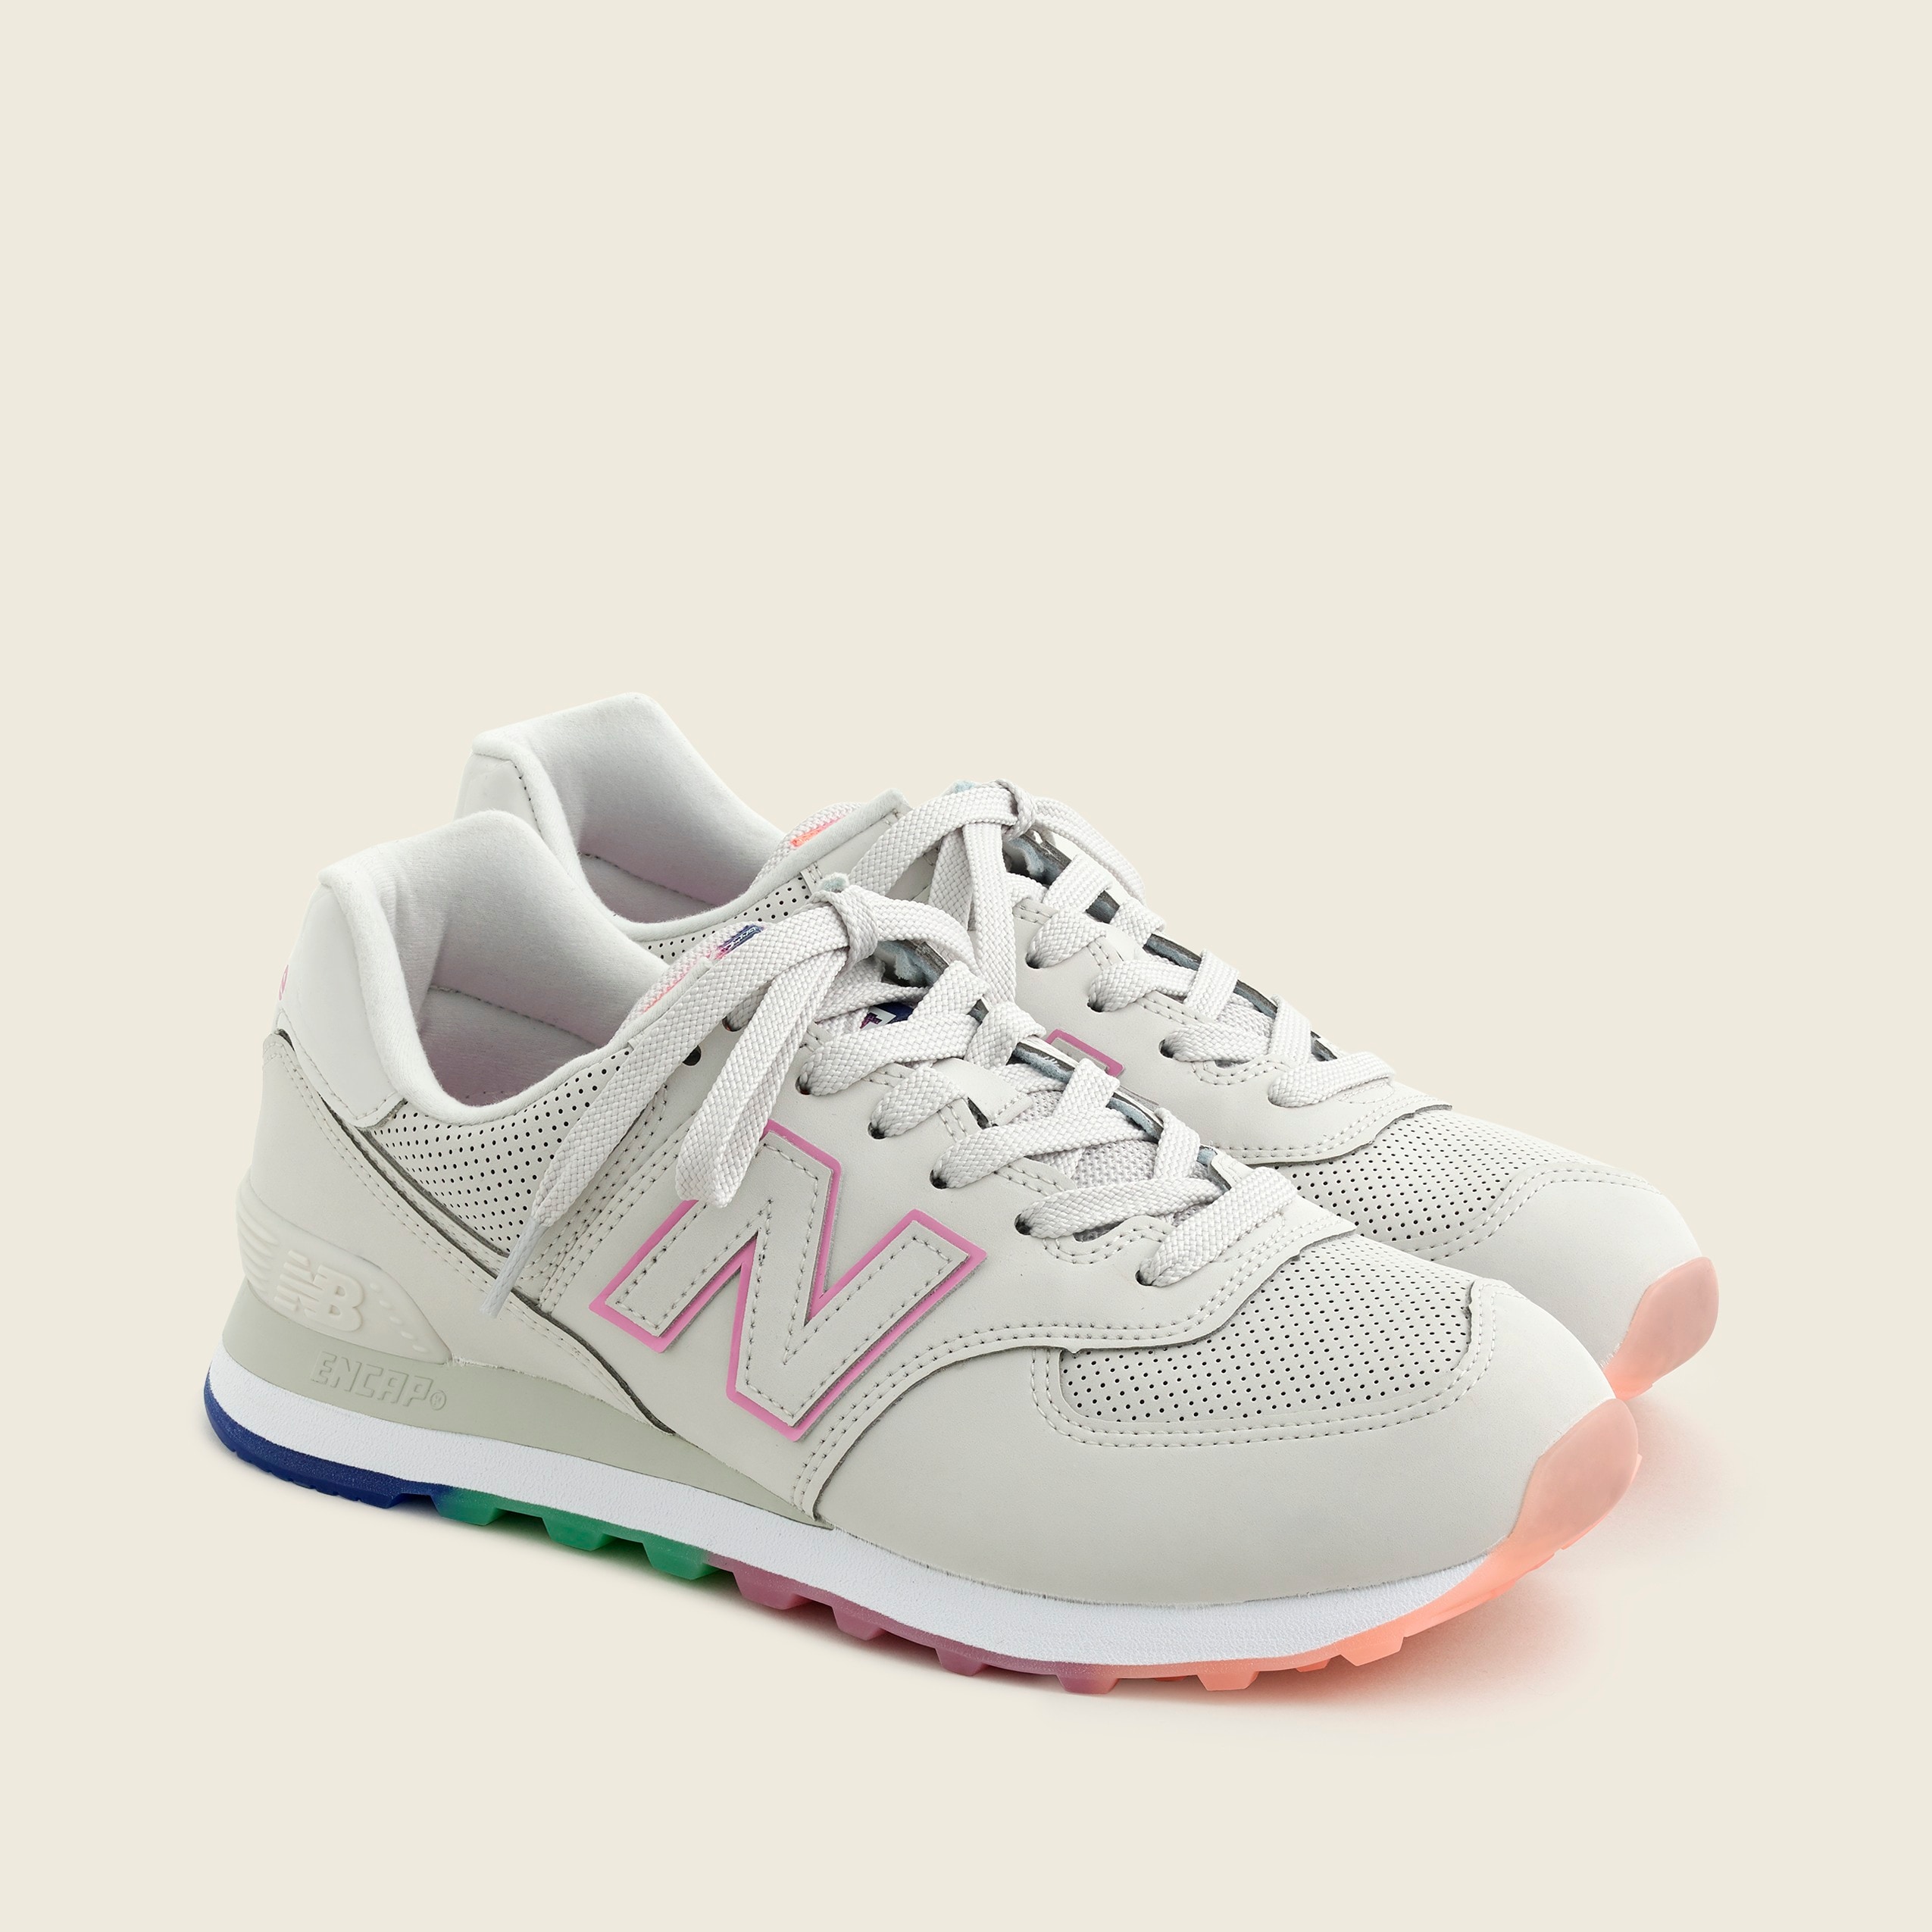 new balance 574 sneakers pink